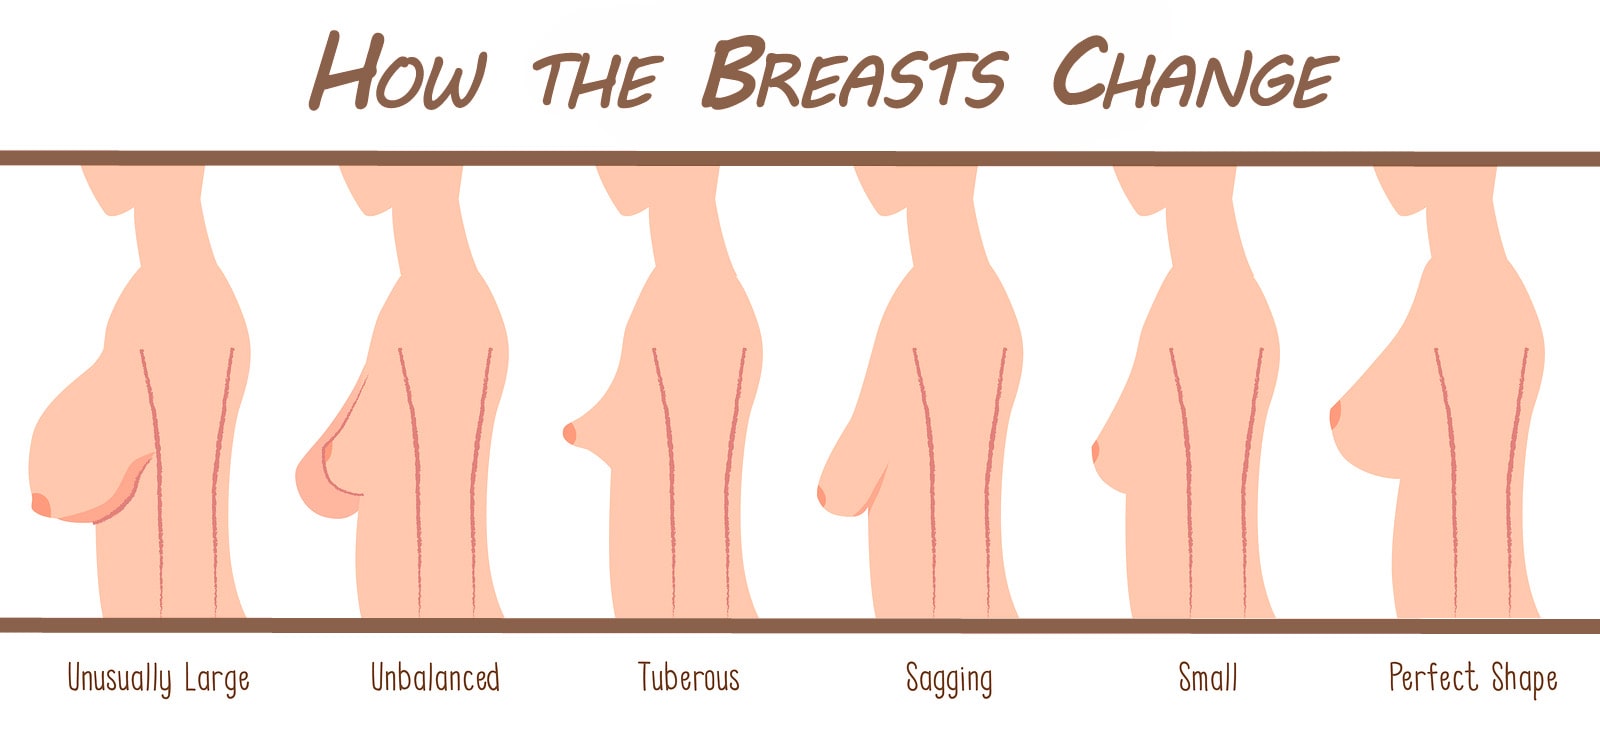 How the Breast Ages